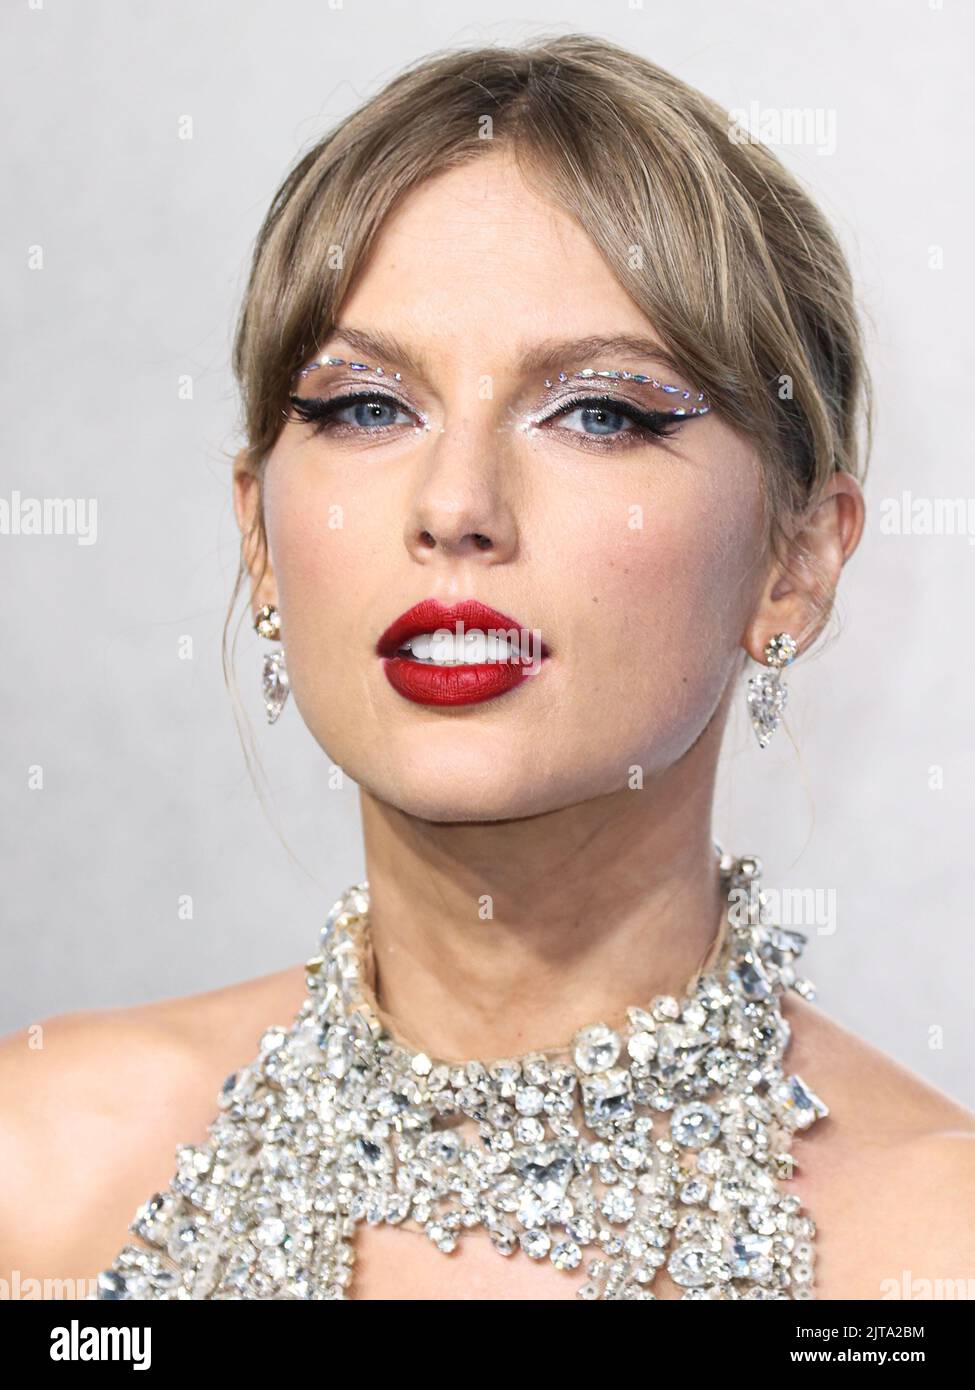 NEWARK, NEW JERSEY, USA - AUGUST 28: Taylor Swift wearing an Oscar de la Renta dress, Christian Louboutin shoes, and Lorraine Schwartz jewelry arrives at the 2022 MTV Video Music Awards held at the Prudential Center on August 28, 2022 in Newark, New Jersey, USA. (Photo by Xavier Collin/Image Press Agency) Stock Photo